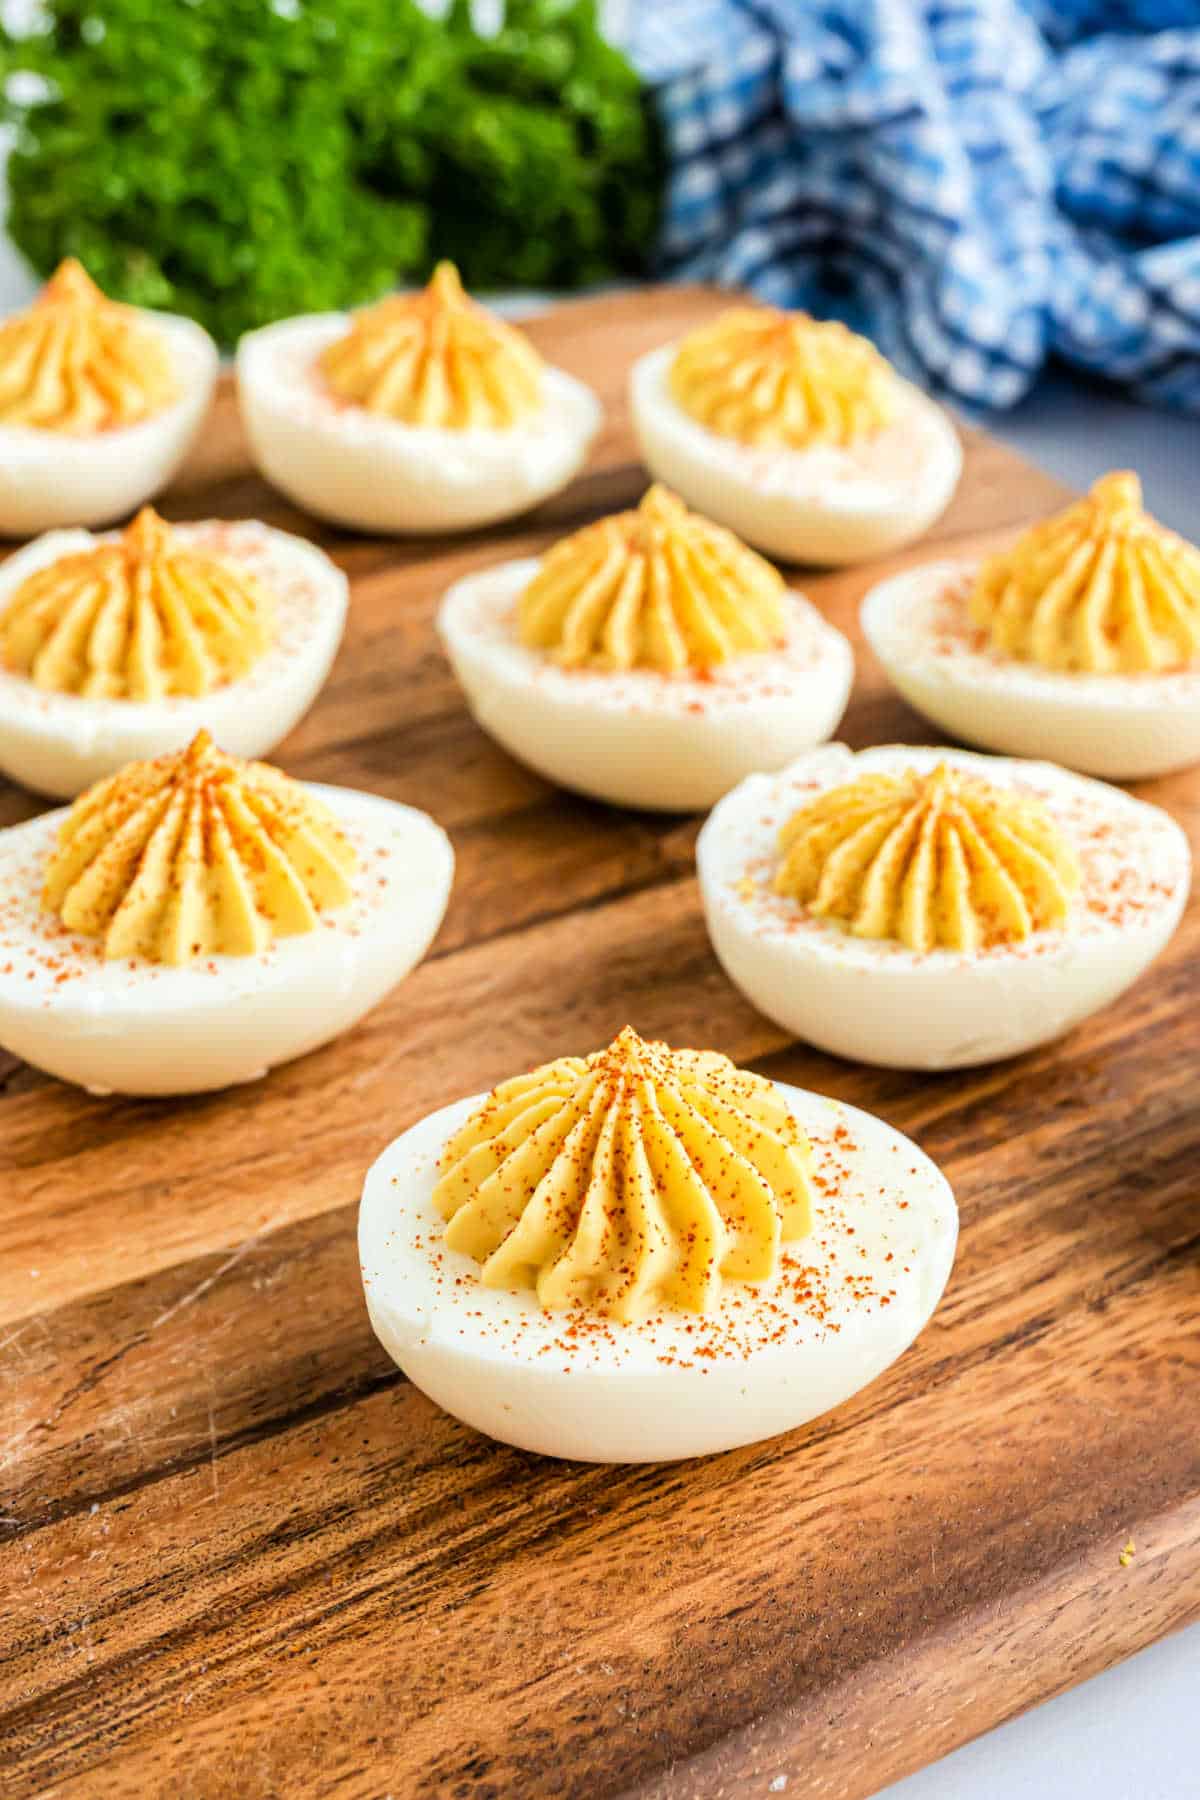 Deviled eggs on a wooden serving tray.